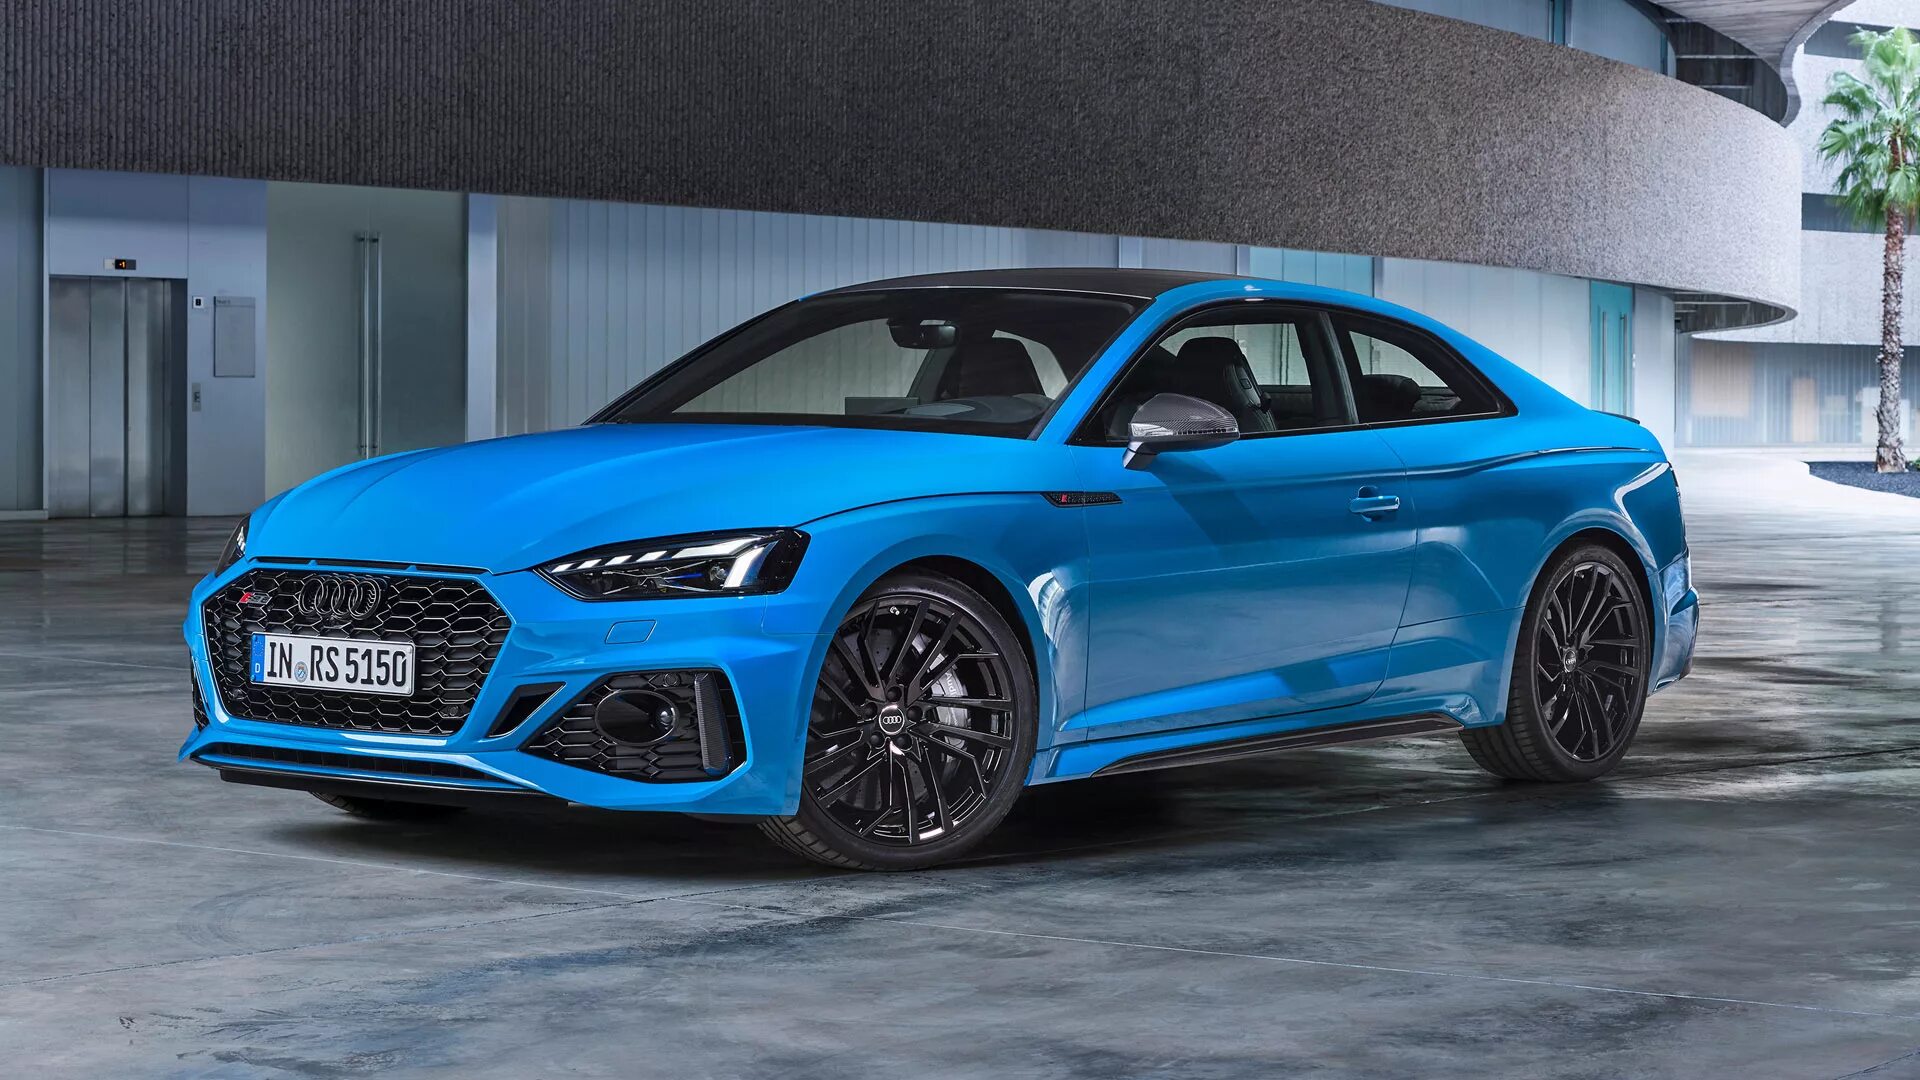 Ауди rs5 2020. Ауди rs5 Coupe 2020. Ауди rs5 2021. Audi rs5 Coupe 2021.